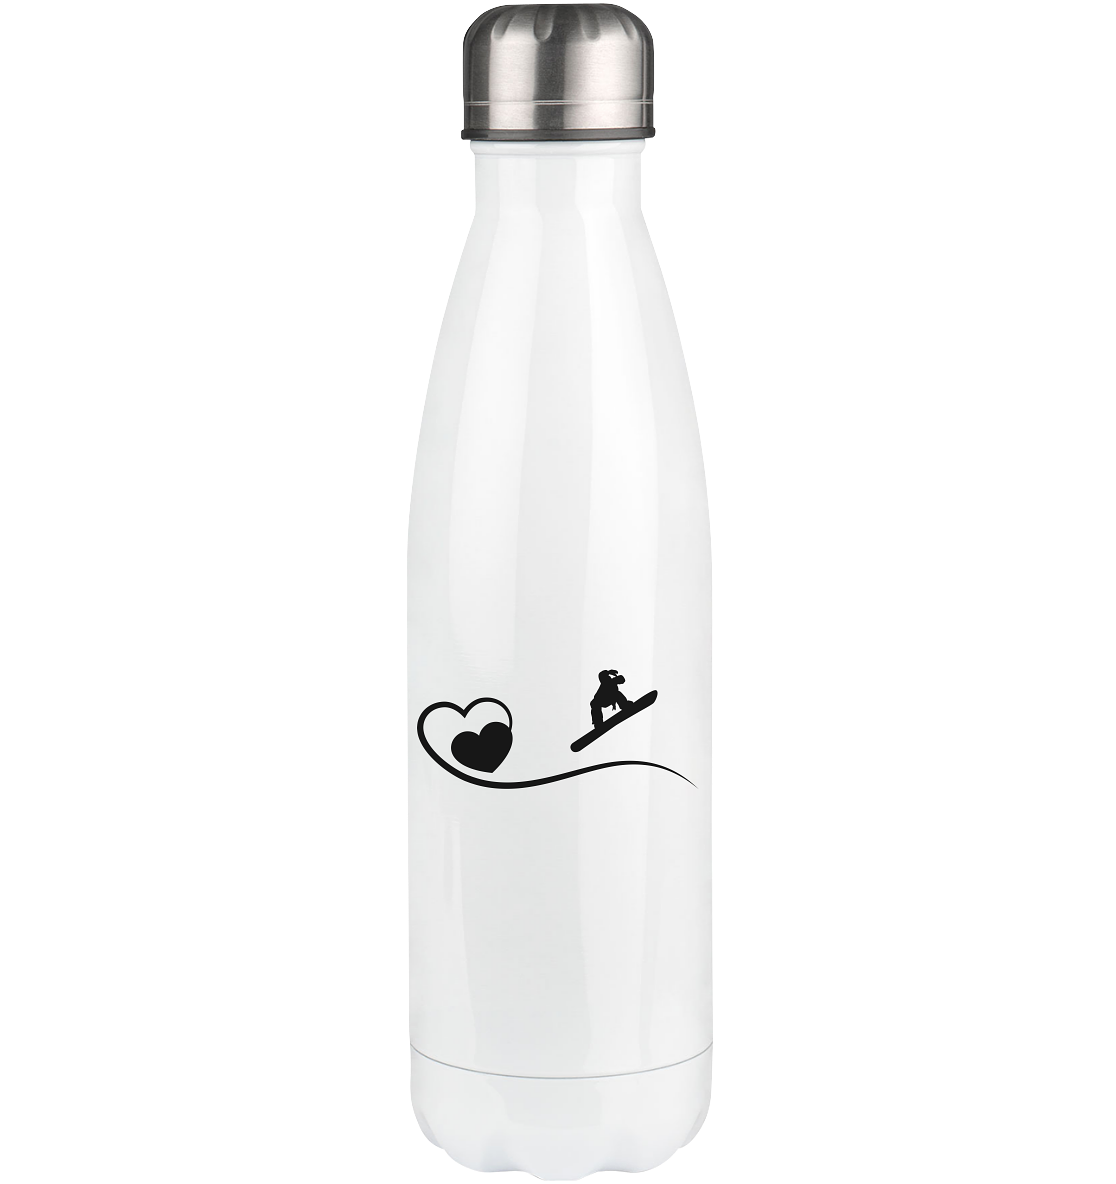 Heart 1 and Snowboarding - Edelstahl Thermosflasche snowboarden 500ml